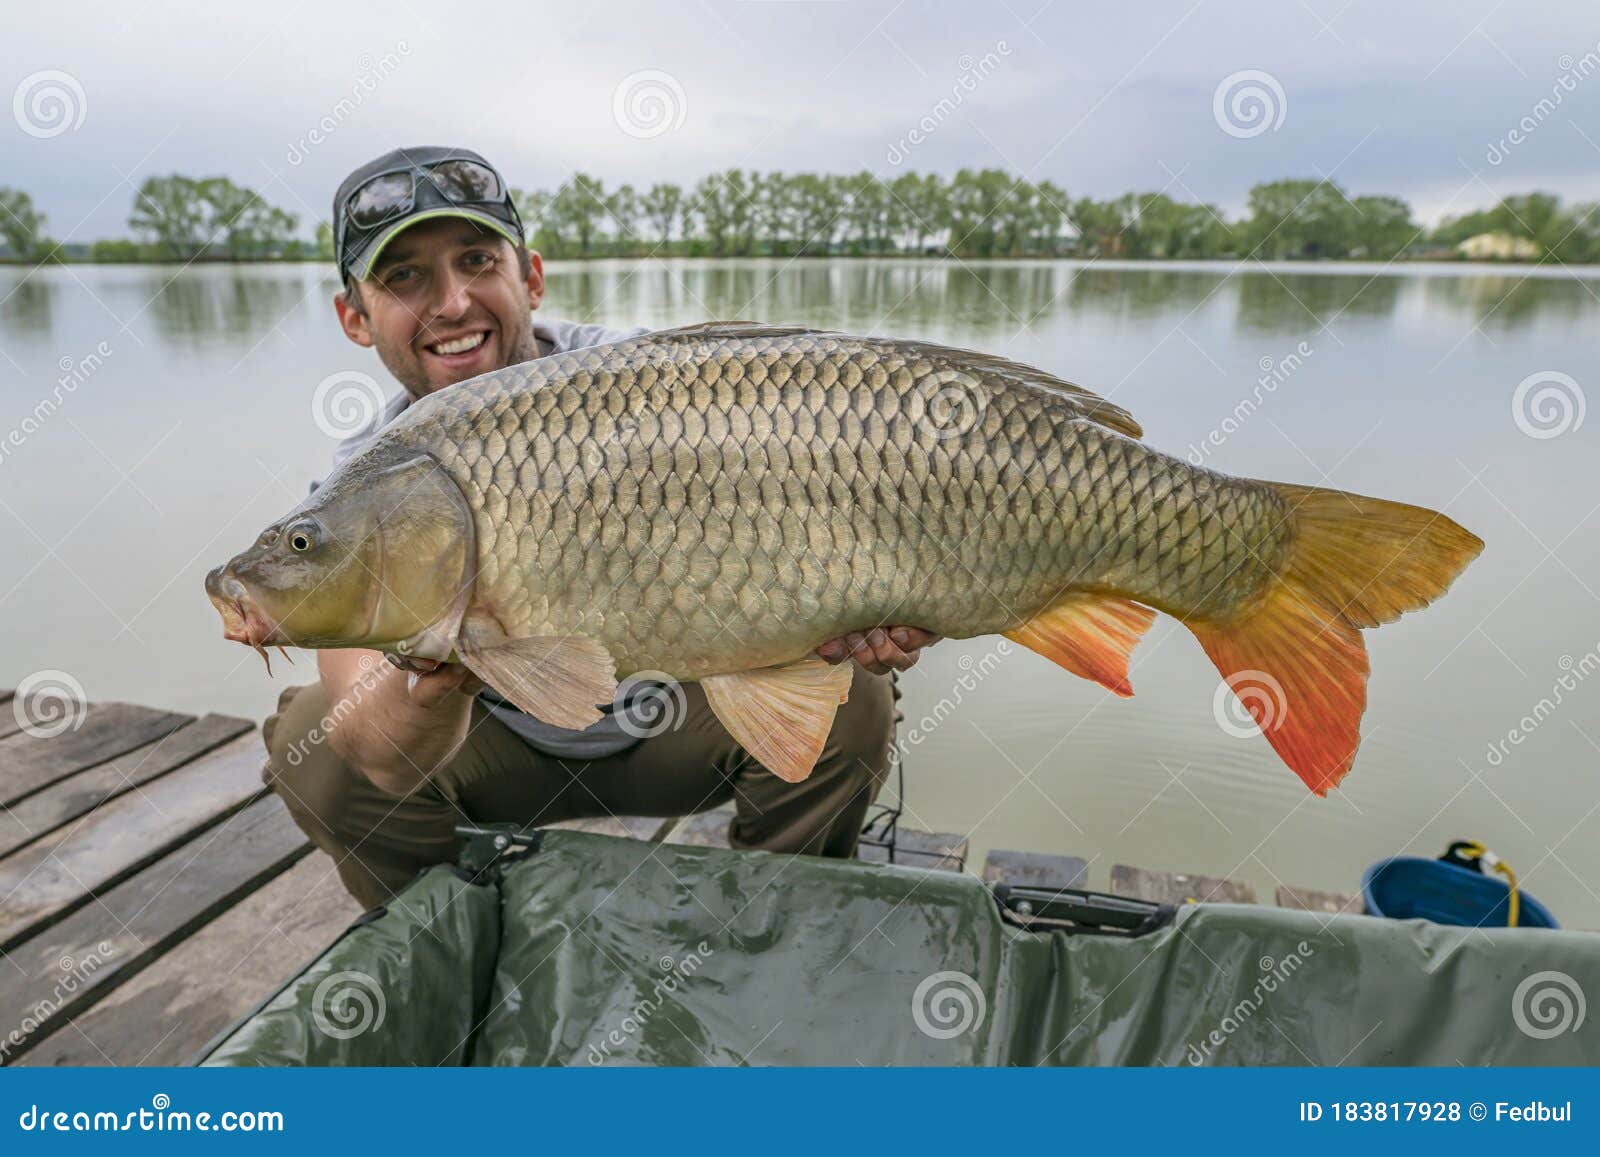 200 Spring Feeder Carp Fishing Stock Photos - Free & Royalty-Free Stock  Photos from Dreamstime